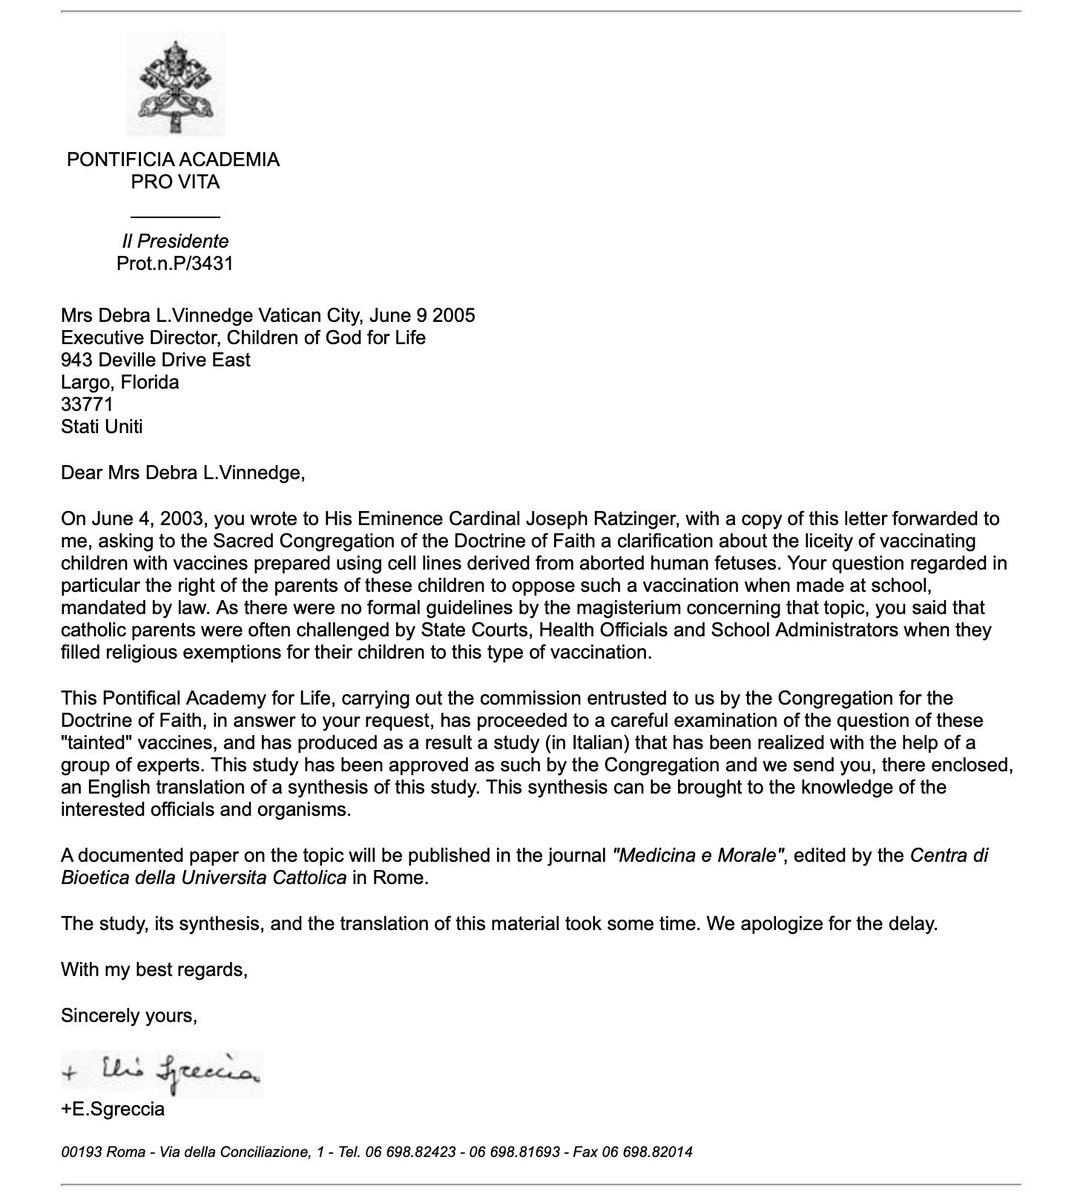 Two Years Later, The Vatican Replied To Vinnedge's Letter.